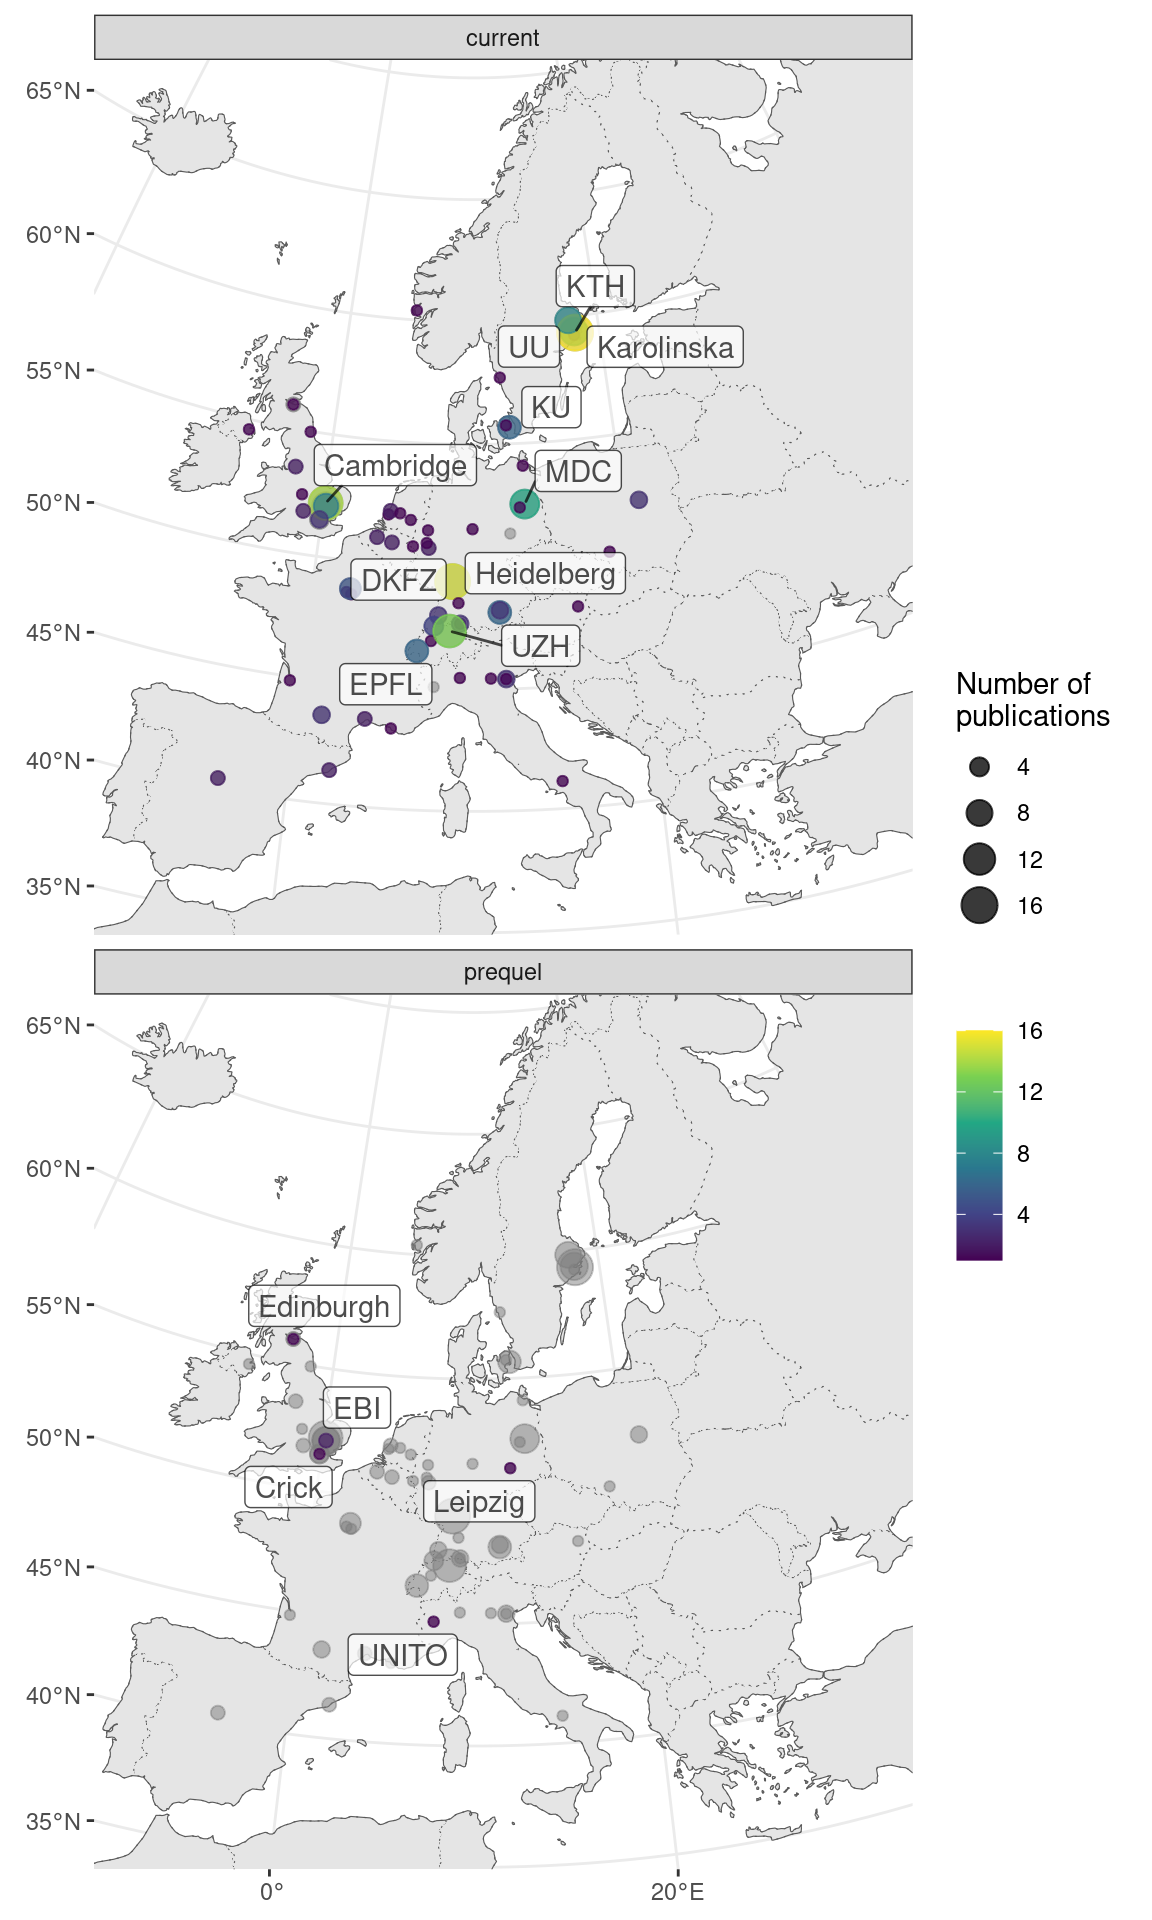 Map of where first authors of current era and prequel data analysis papers were located as of publication in western Europe. Top 5 institutions in each era are labeled.